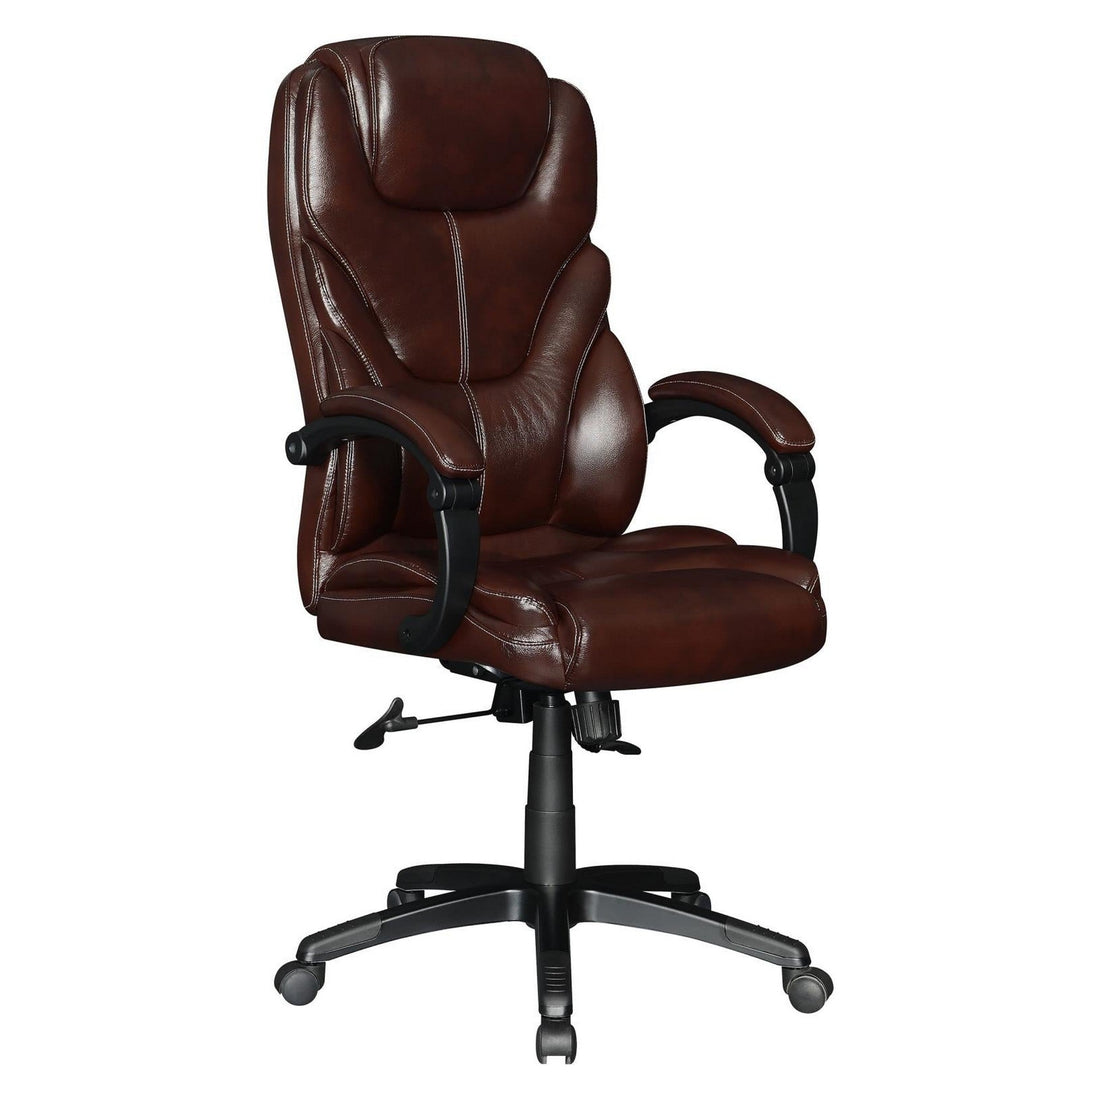 Upholstered Curved Arm Office Chair Brown and Black 802258